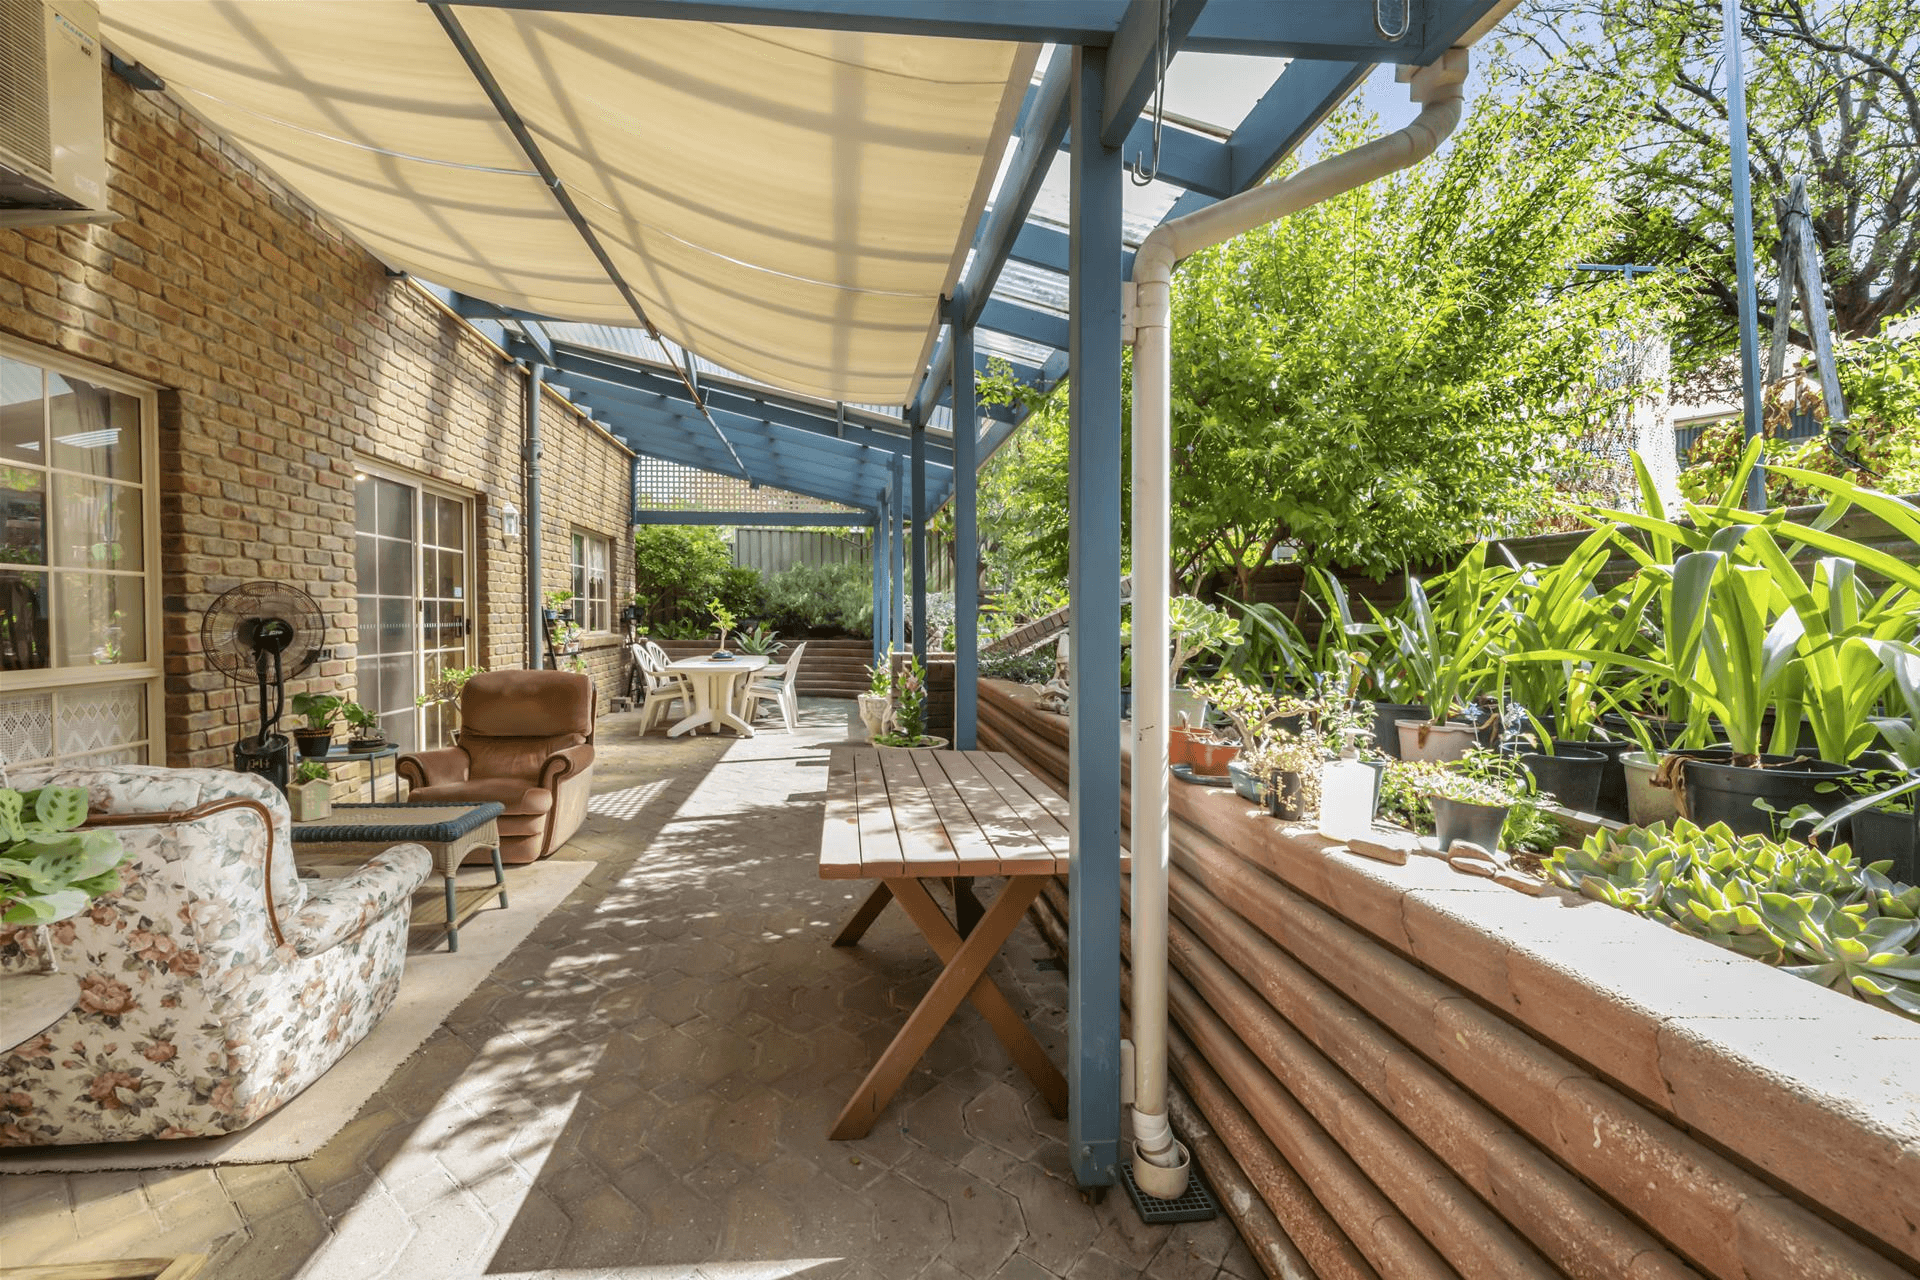 28 Altair Avenue West, Hope Valley, SA 5090